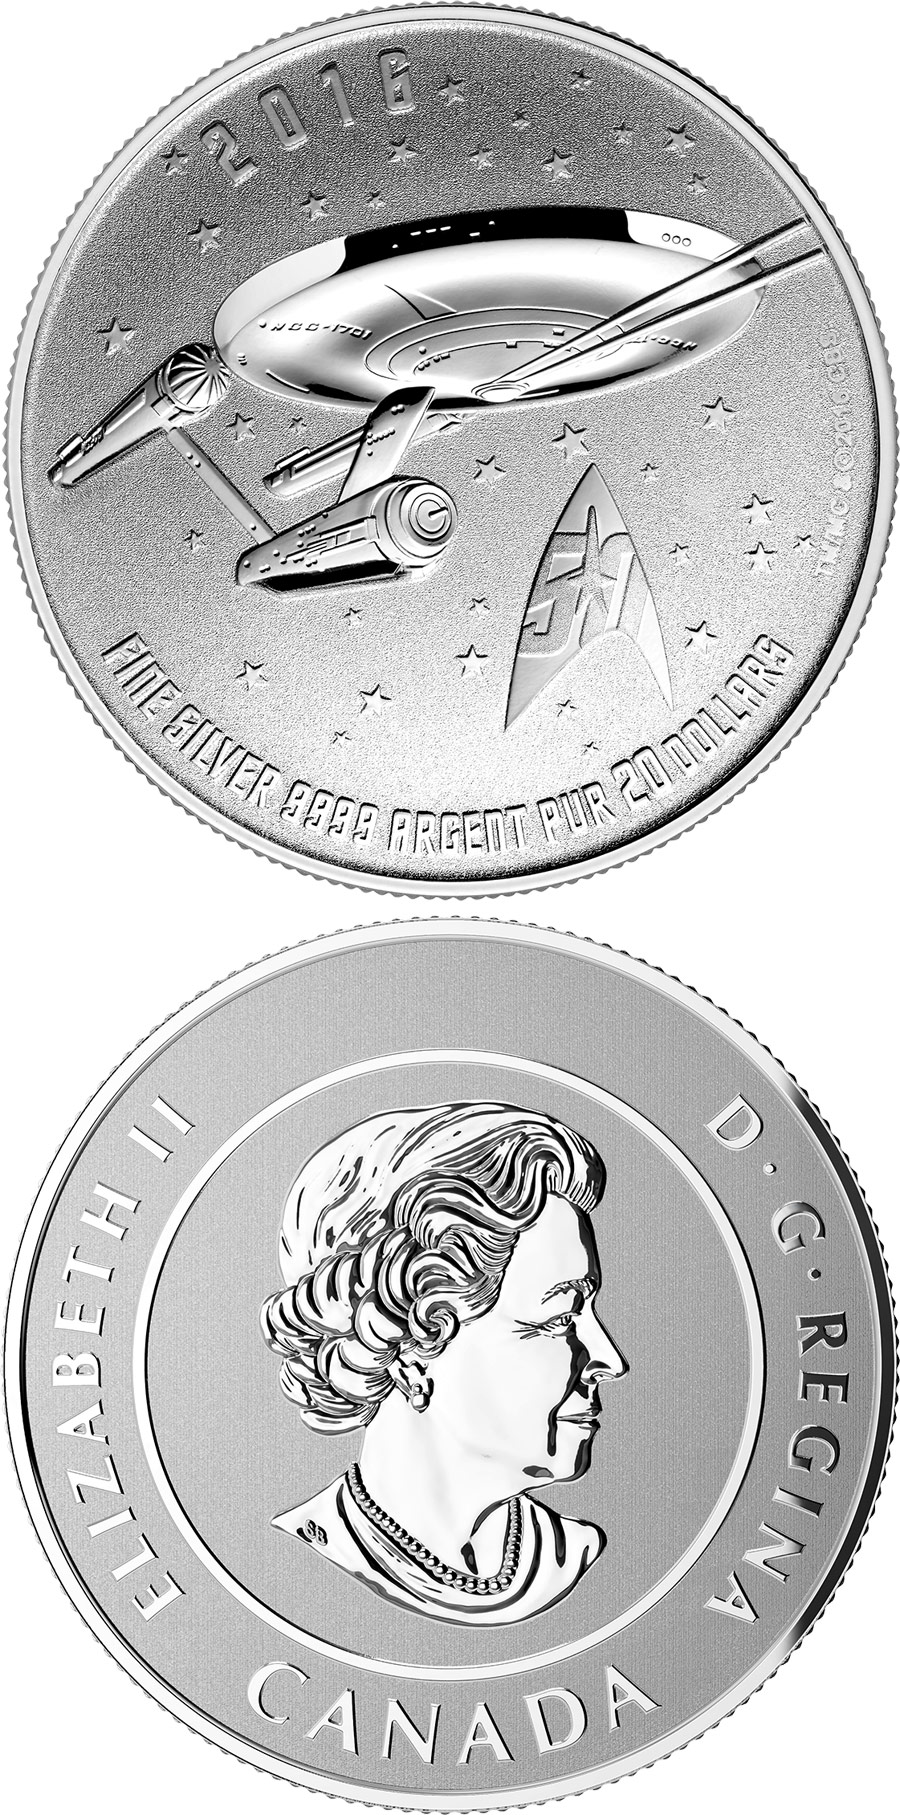 Image of 20 dollars coin - Star Trek Enterprise | Canada 2016.  The Silver coin is of BU quality.